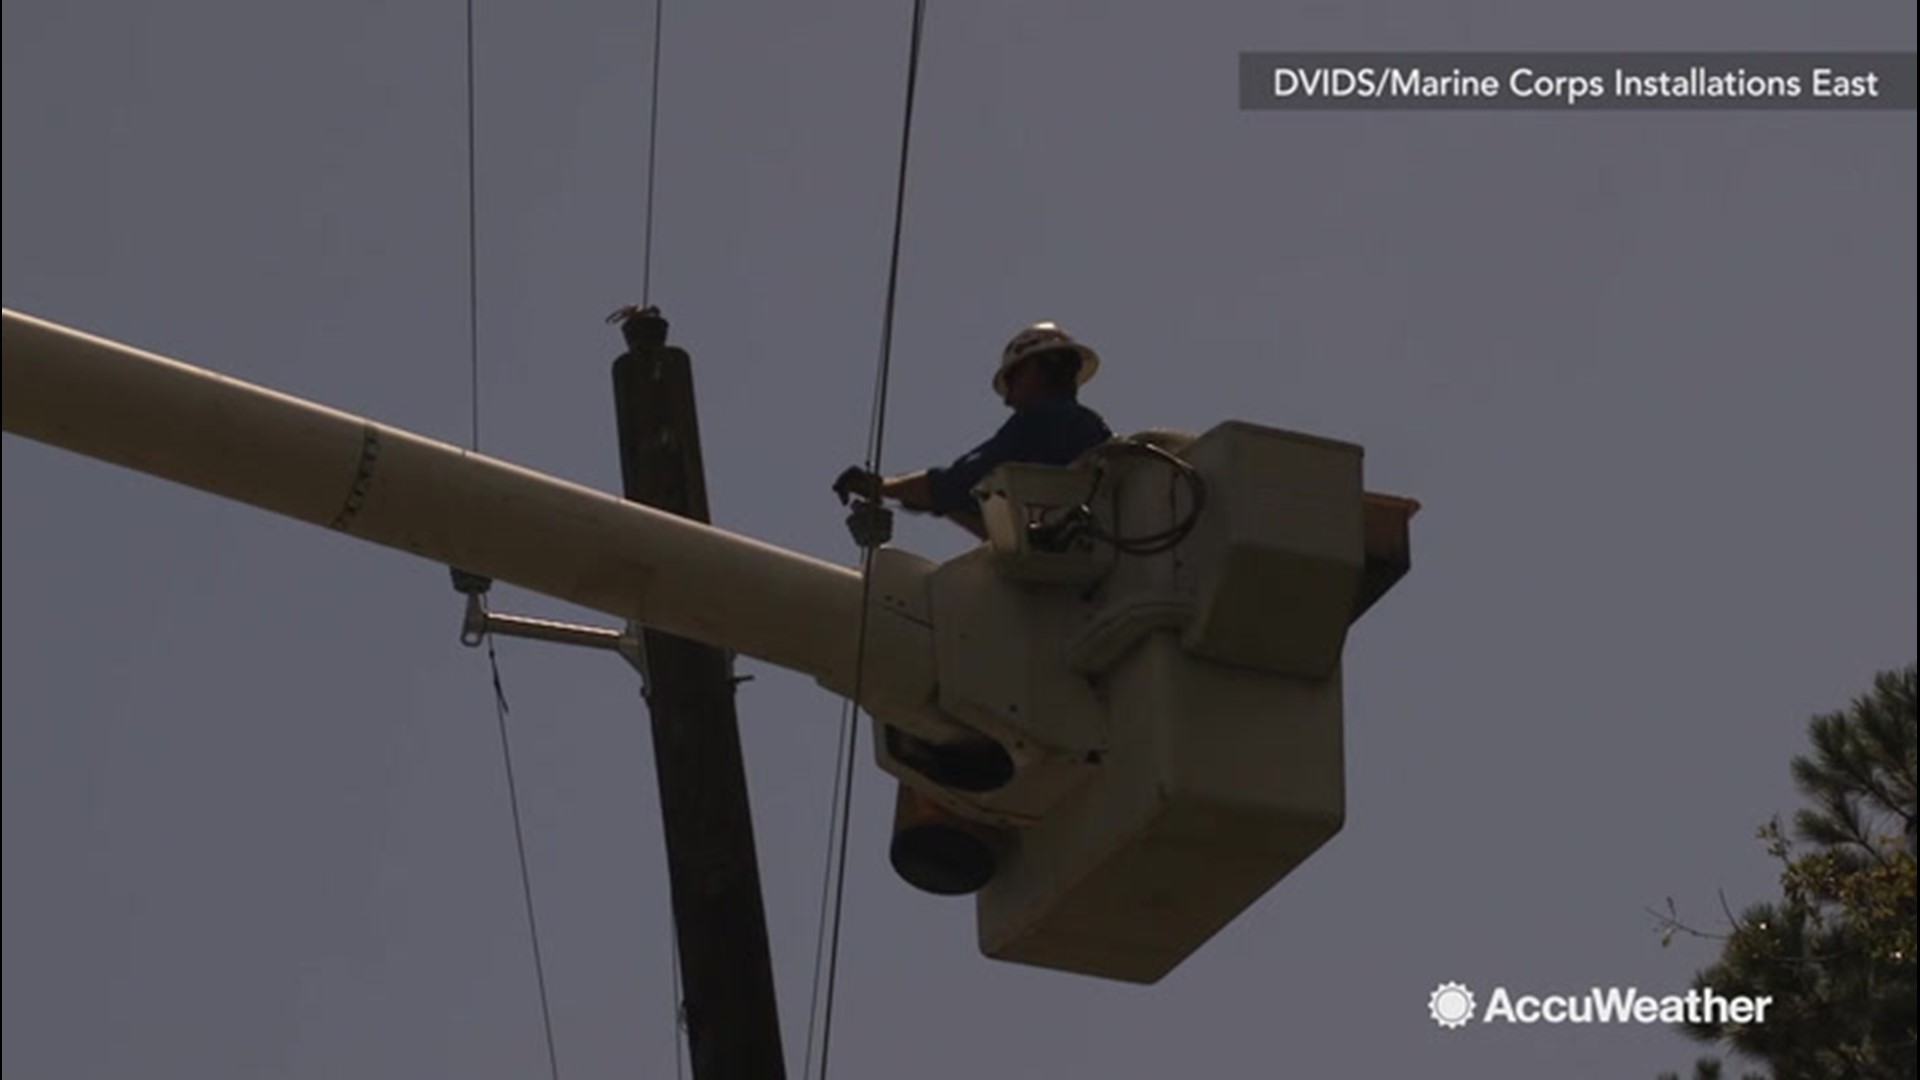 Contracted construction workers were hard at work restoring power to Camp Lejeune, North Carolina, on Sept. 6, after Hurricane Dorian inflicted damage to the area.